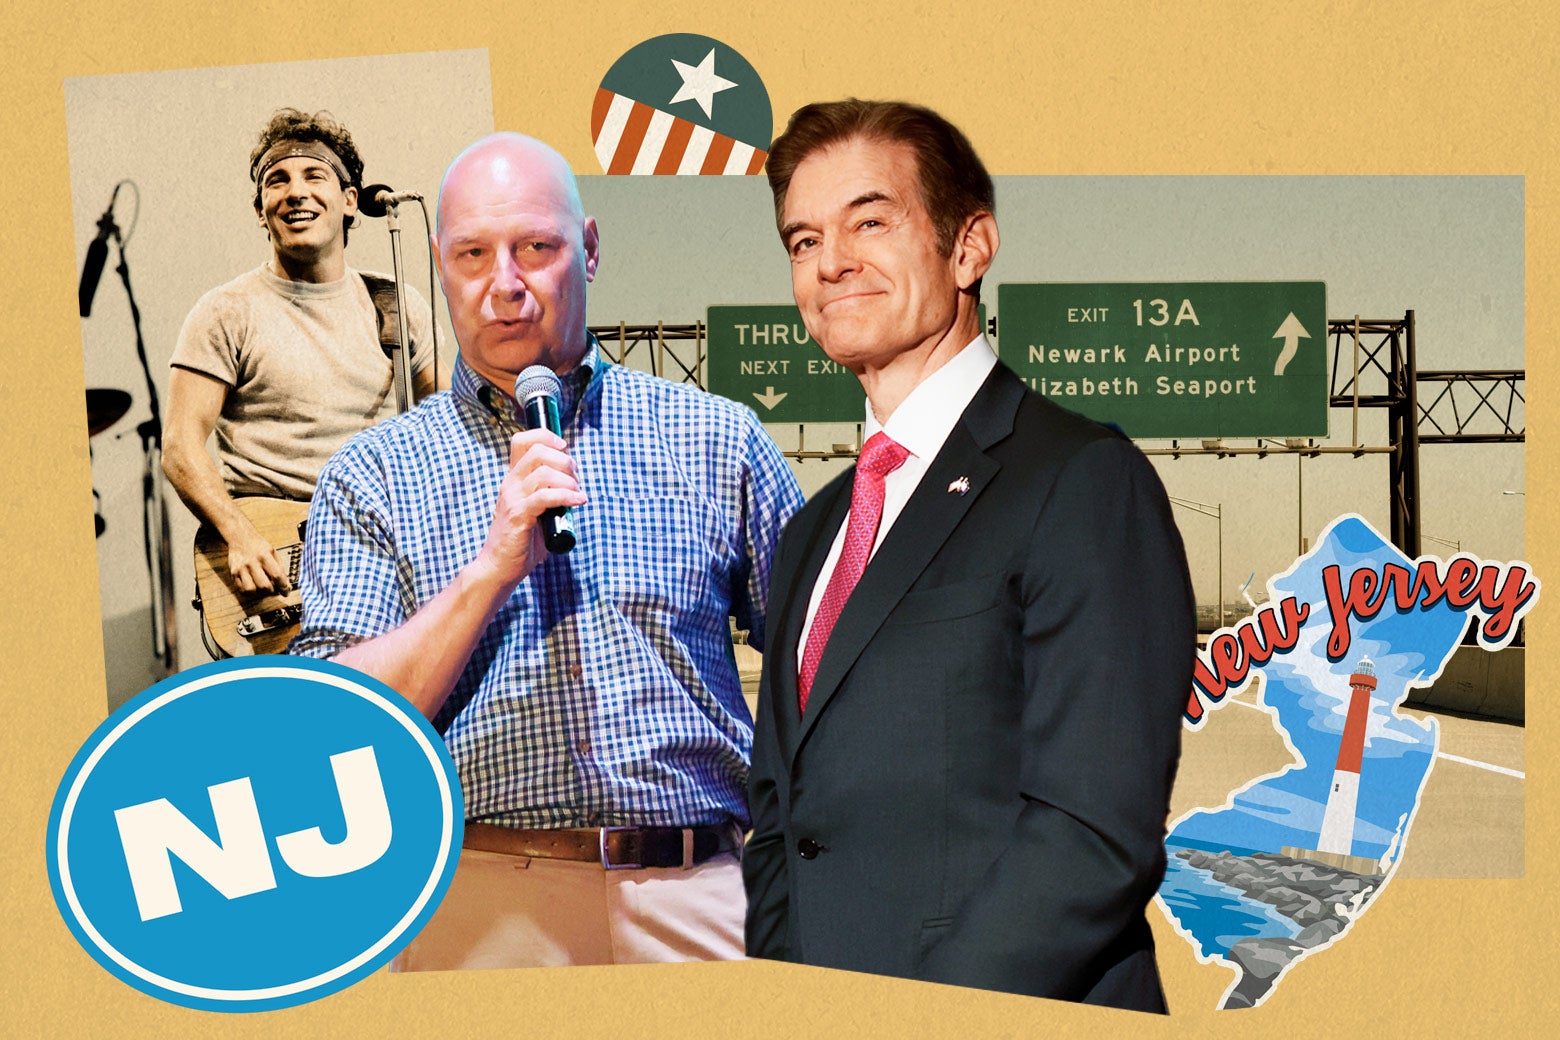 Mastriano, wearing a button-down shirt and holding a microphone, is seen in a collage with Dr. Oz, Bruce Springsteen, the New Jersey Turnpike, and a cutout silhouette of the state in which a Jersey Shore beach is visible.